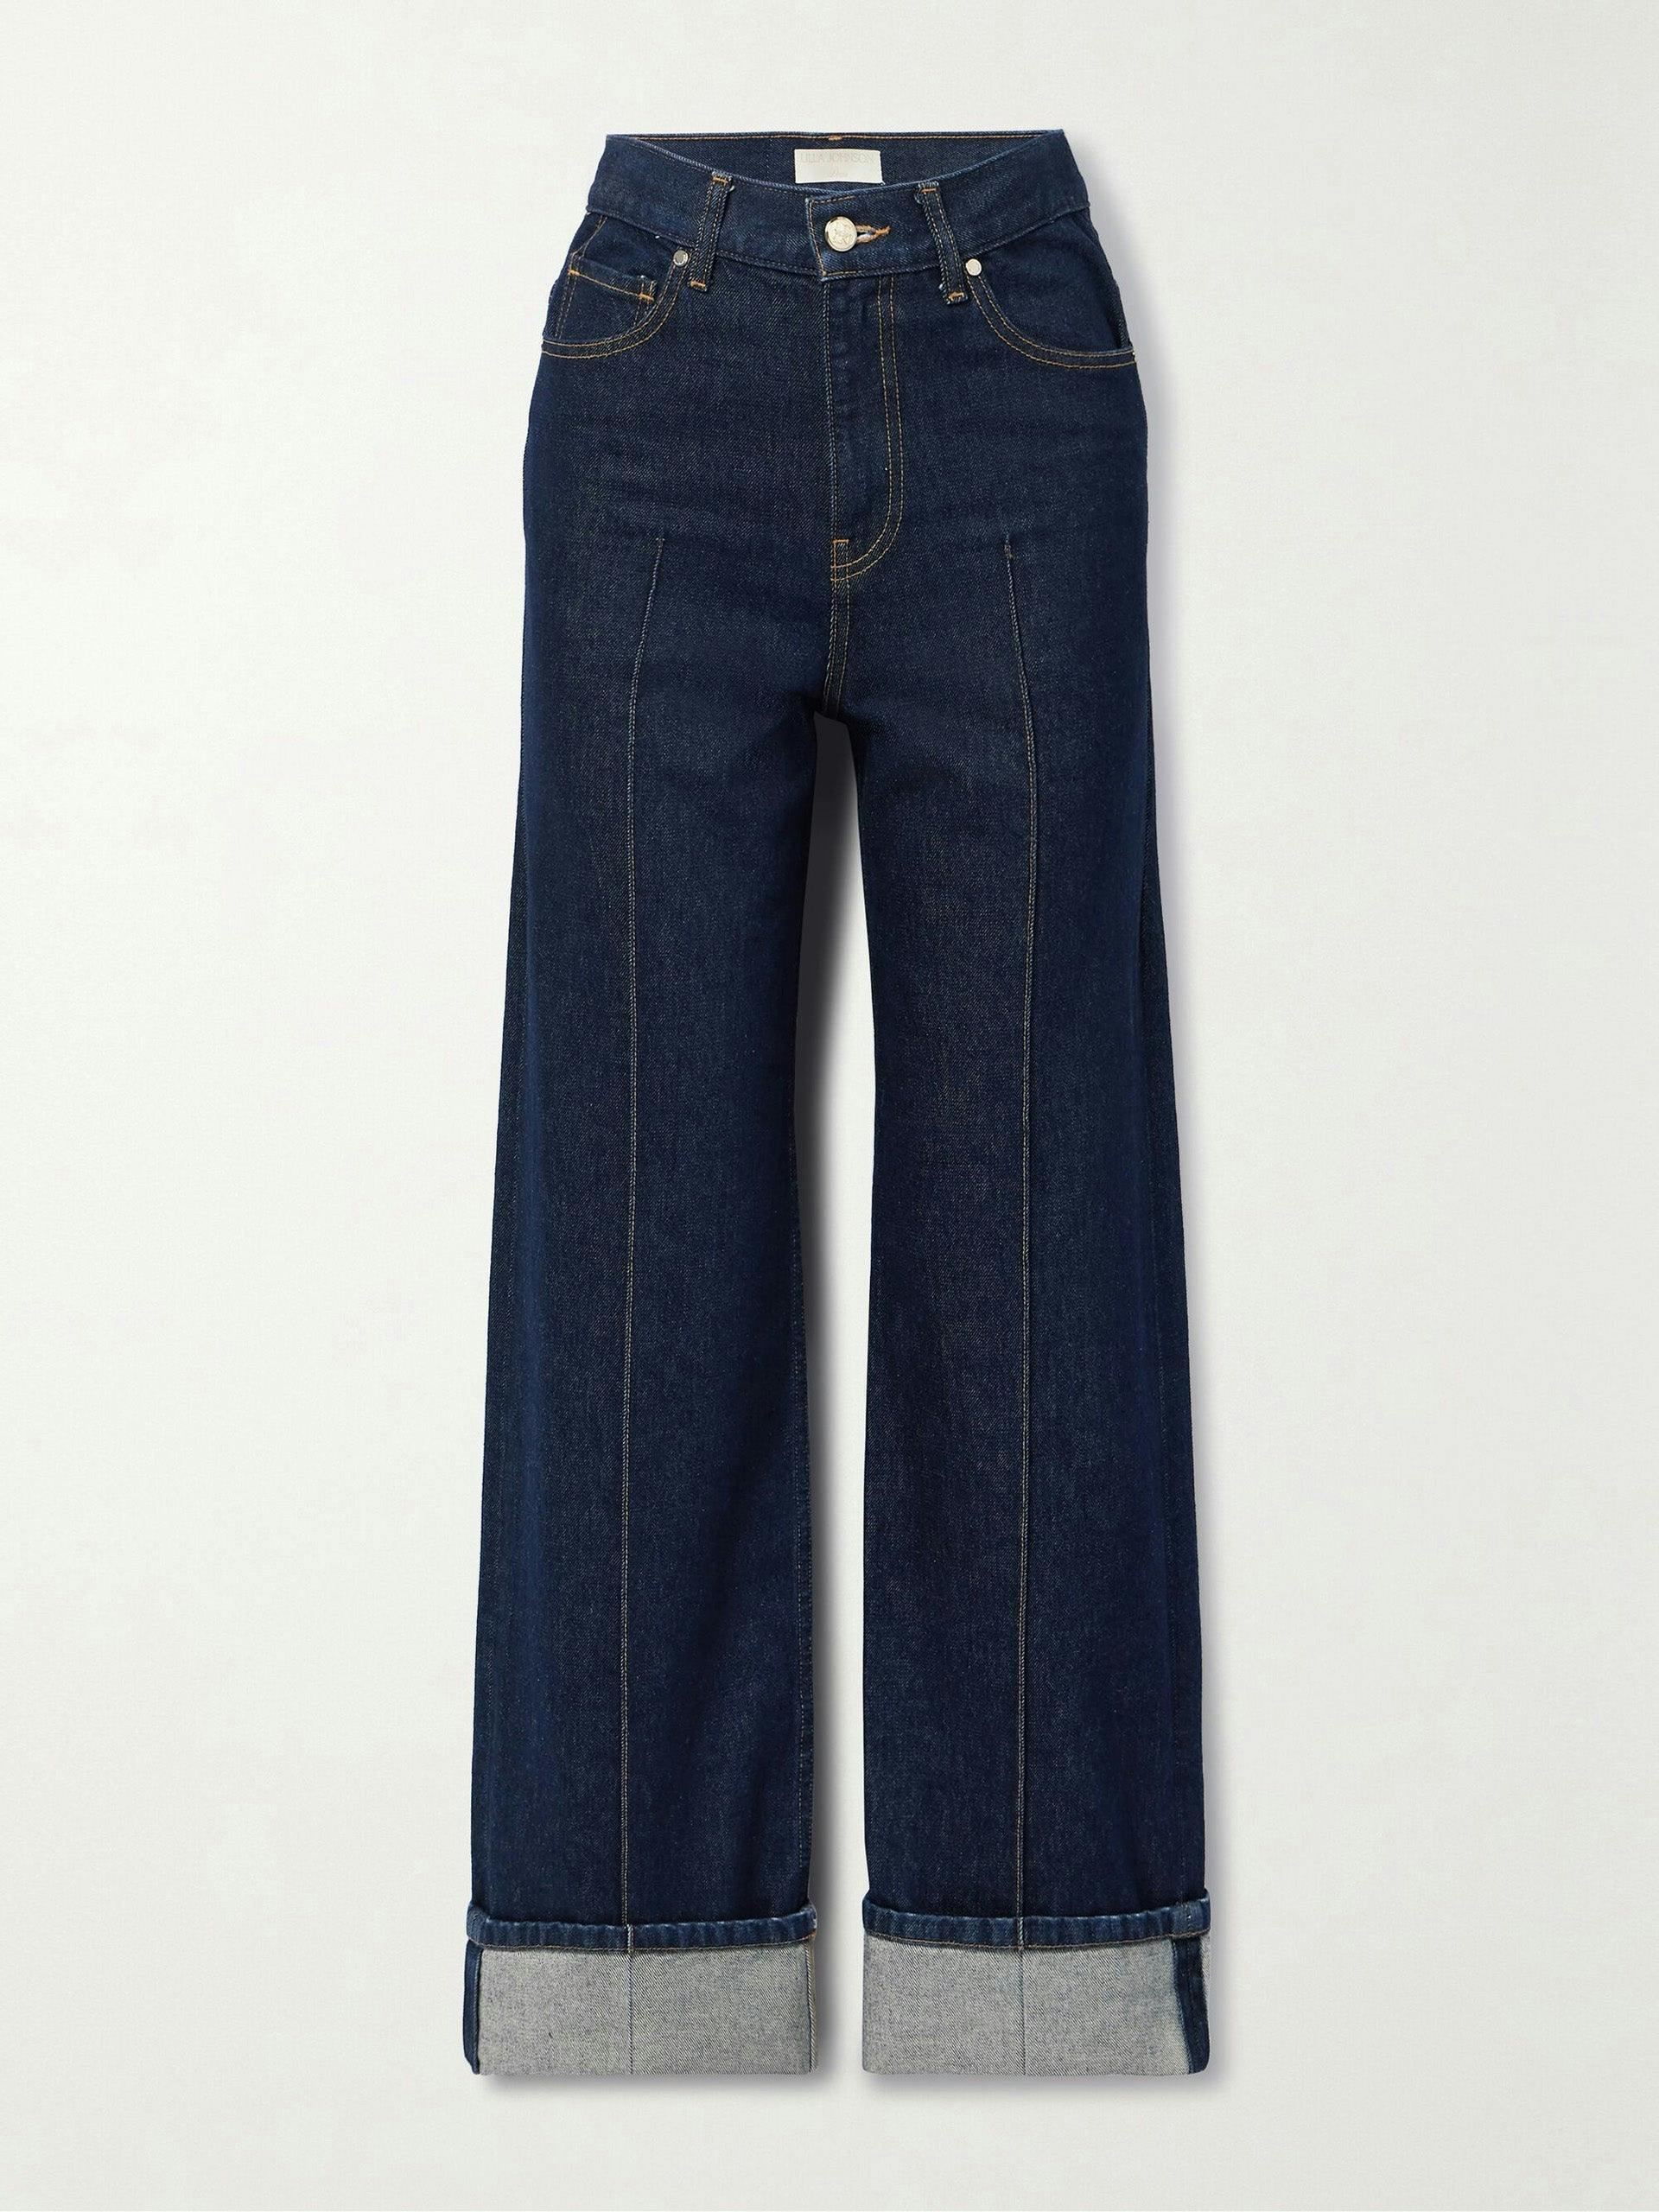 The Genevieve high-rise straight-leg jeans